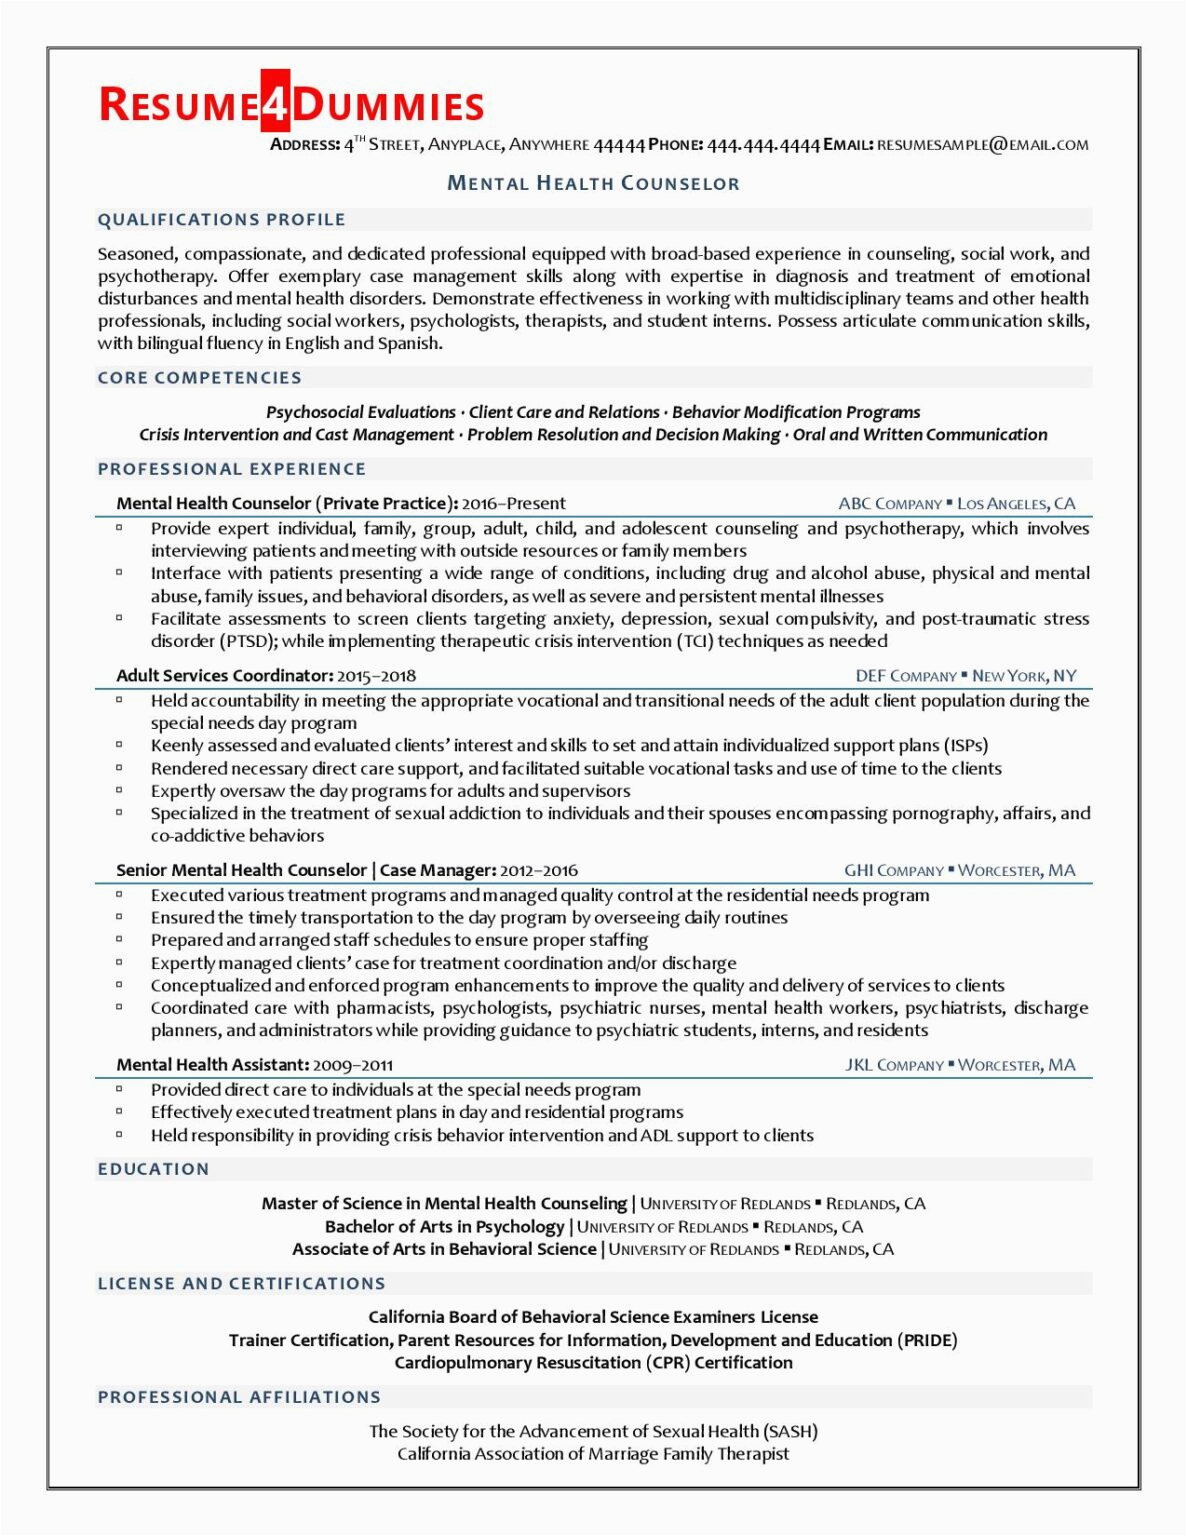 Sample Resumes for Mental Health Professionals Mental Health Counselor Resume Example